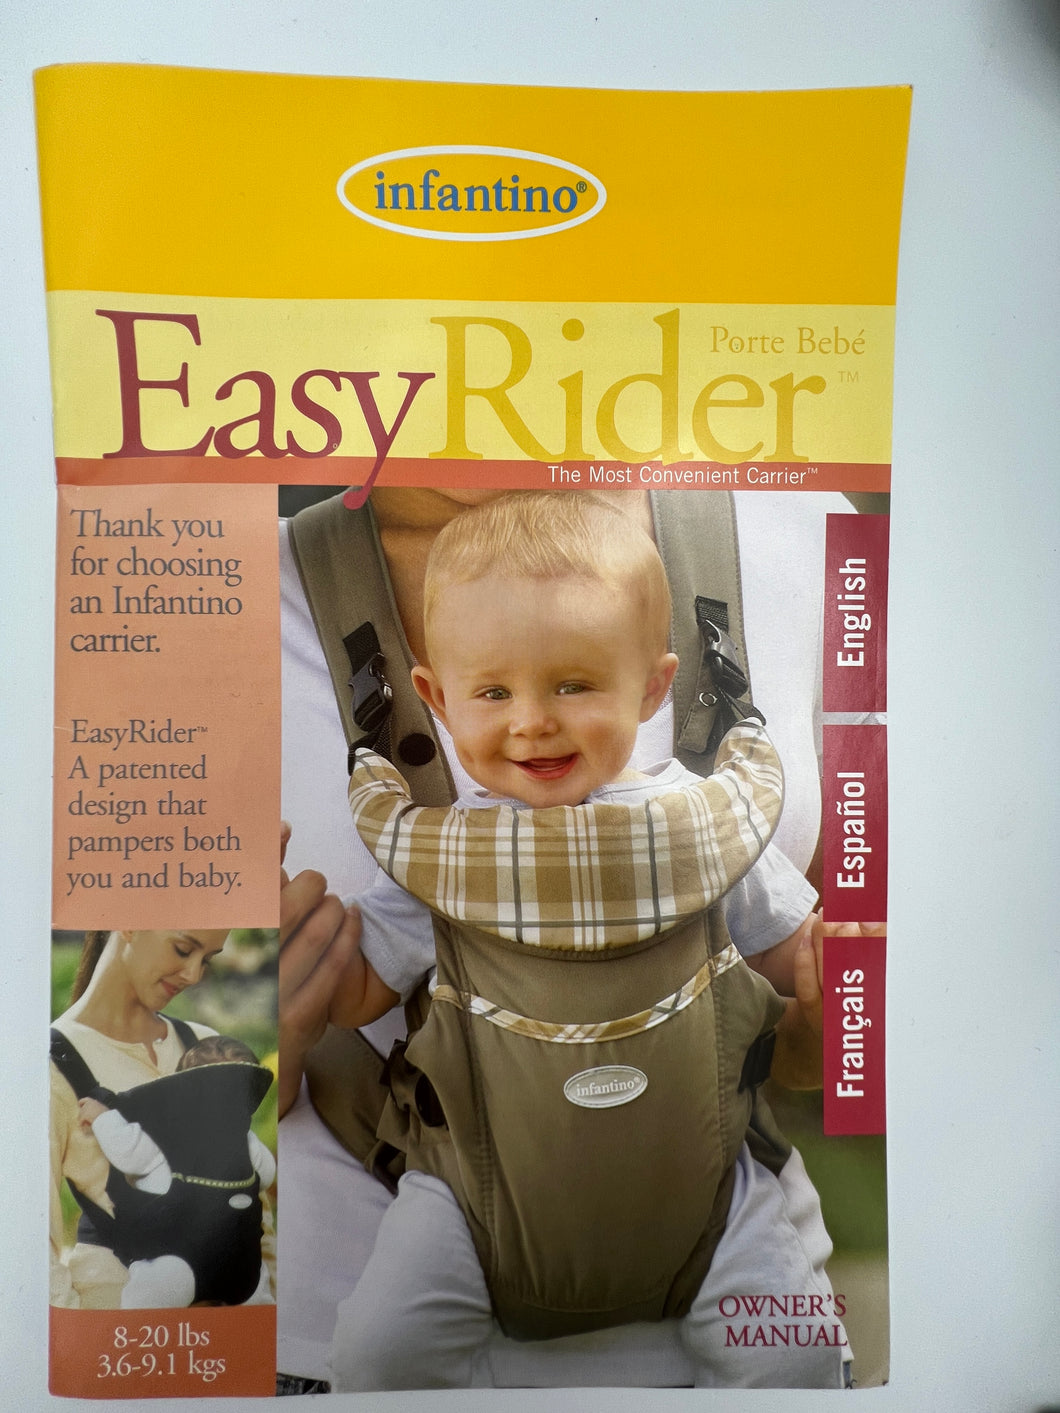 Infantino Easy Rider Carrier Tan Hardly used for 8-20 pounds